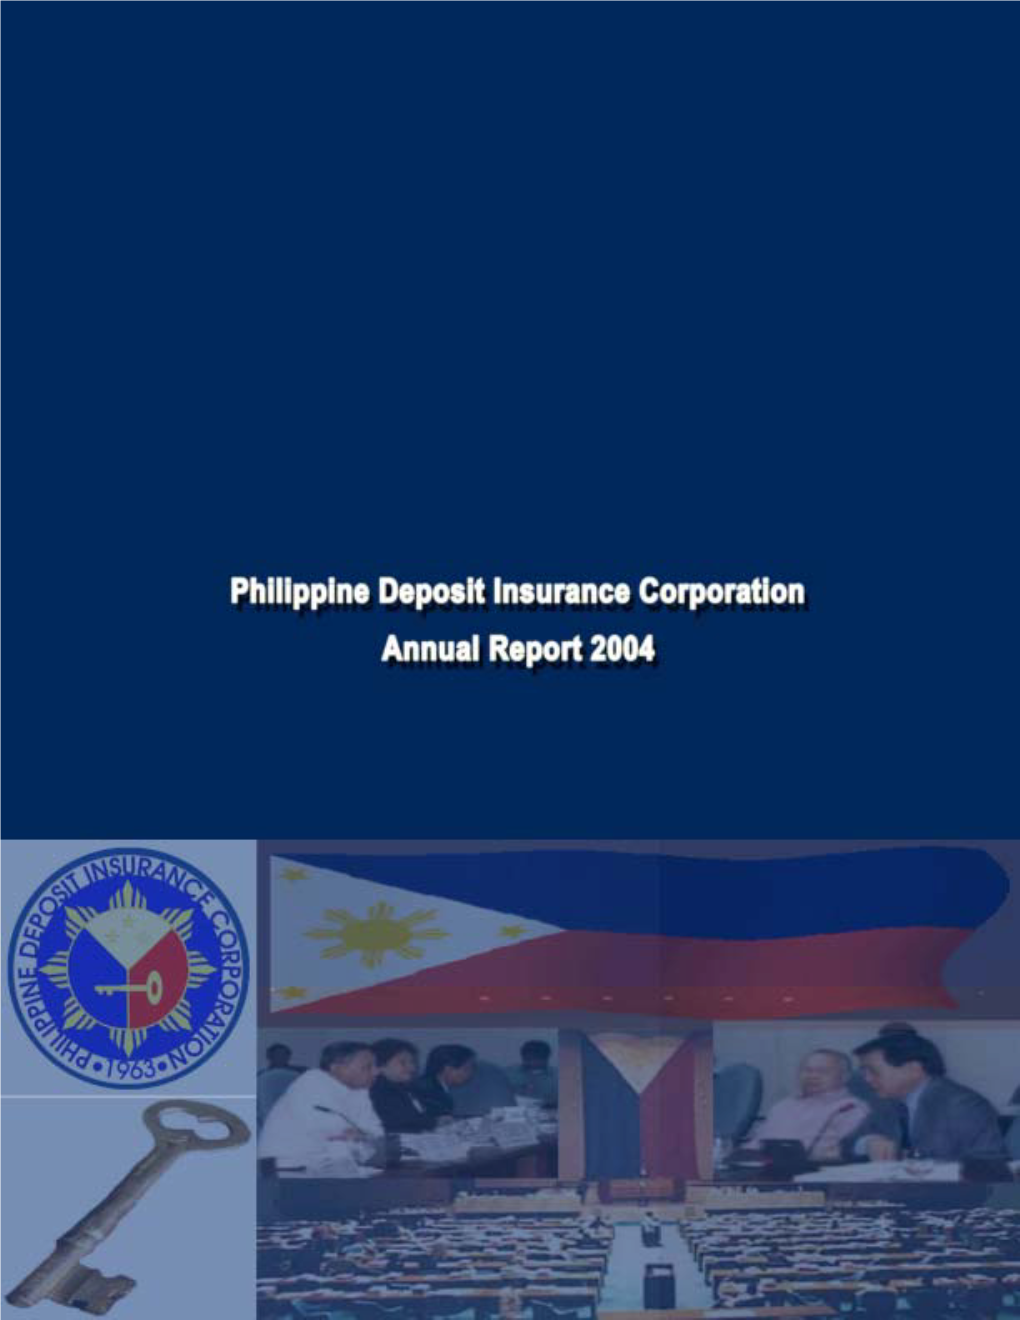 2004 Annual Report of the Philippine Deposit Insurance Corporation Pursuant to Section 15 of Republic Act 3591, As Amended